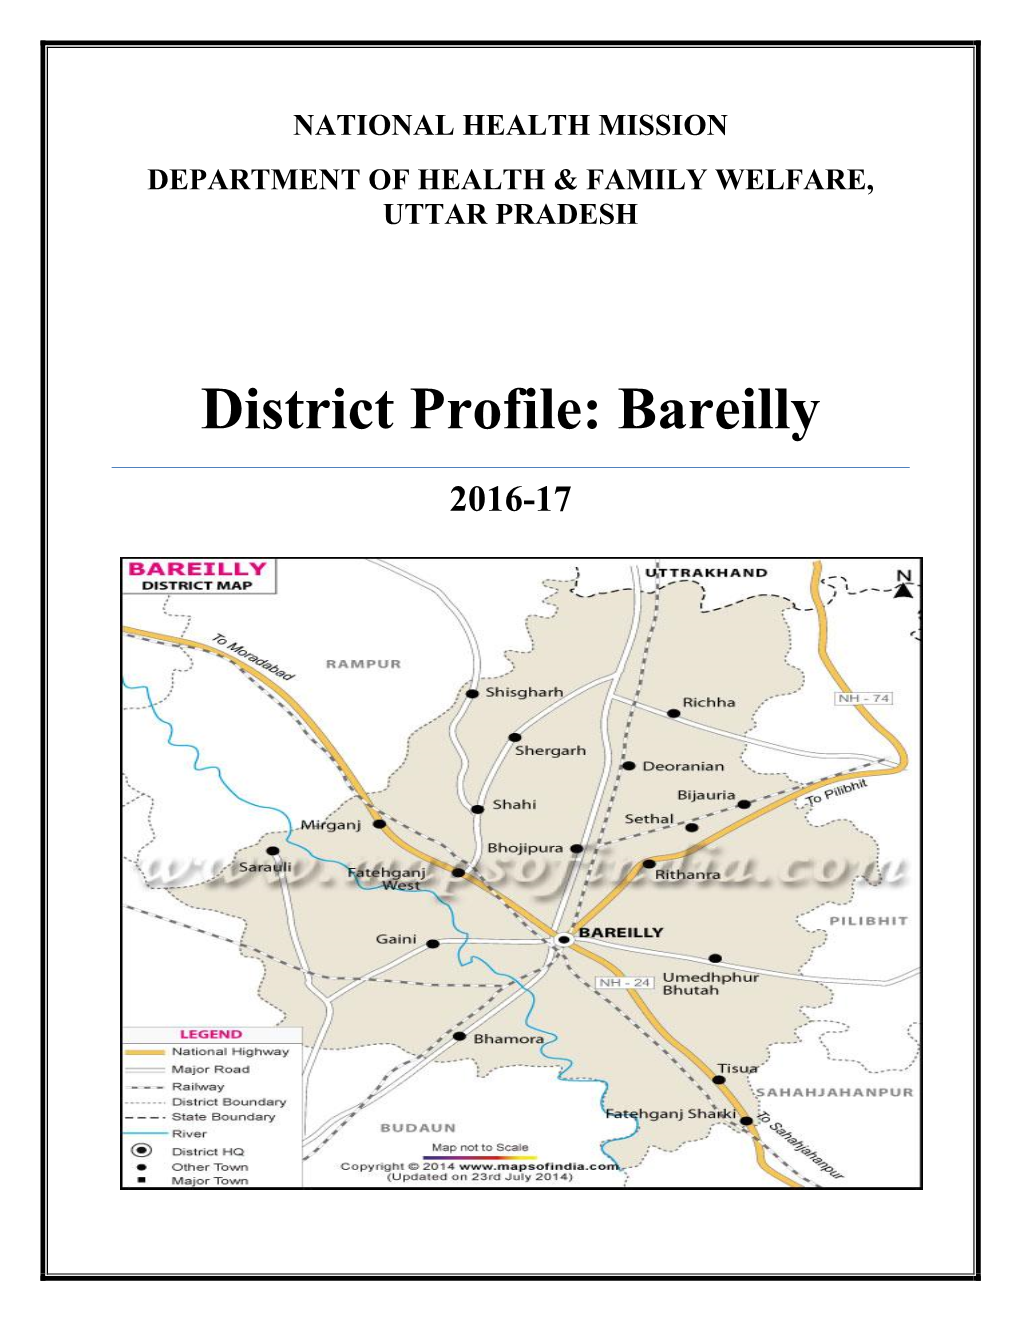 District Profile: Bareilly